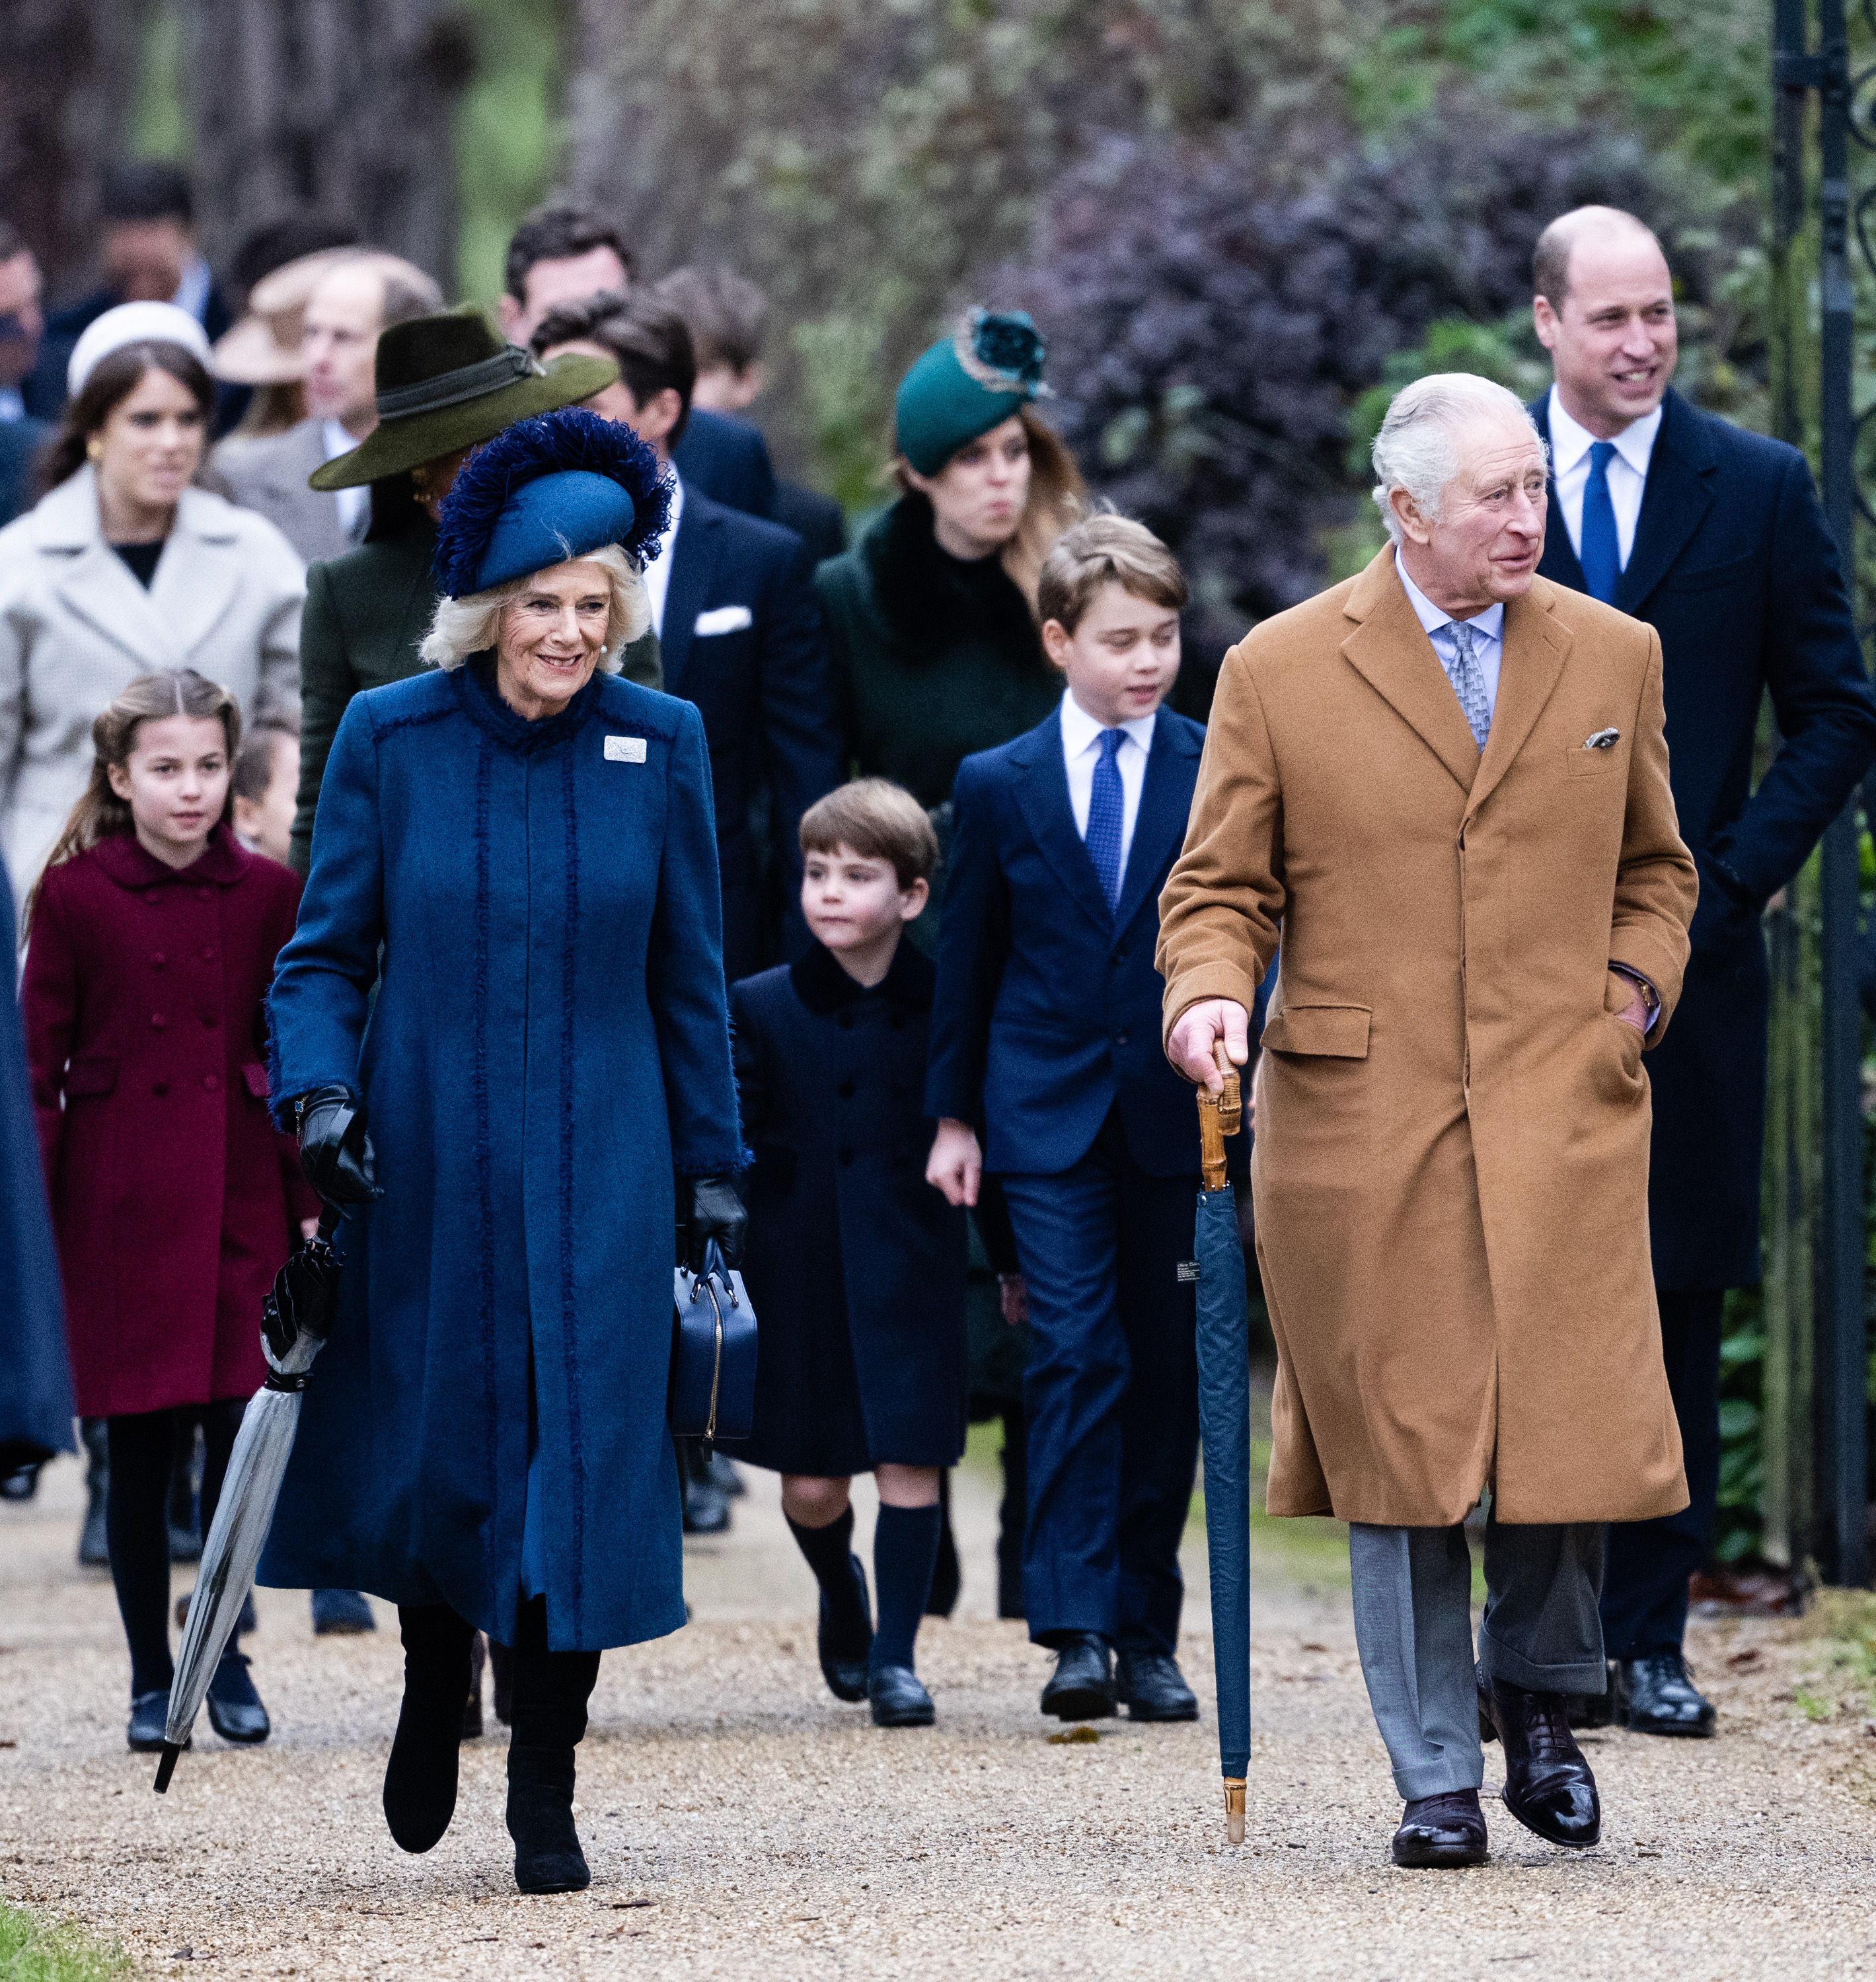 <p>Queen Consort Camilla and King Charles III led their three grandchildren -- Princess Charlotte, Prince Louis and Prince George -- plus other members of the royal family including Prince William to Christmas services at St. Mary Magdalene Church at the king's Sandringham estate in Norfolk, England, on Dec. 25, 2022. </p>